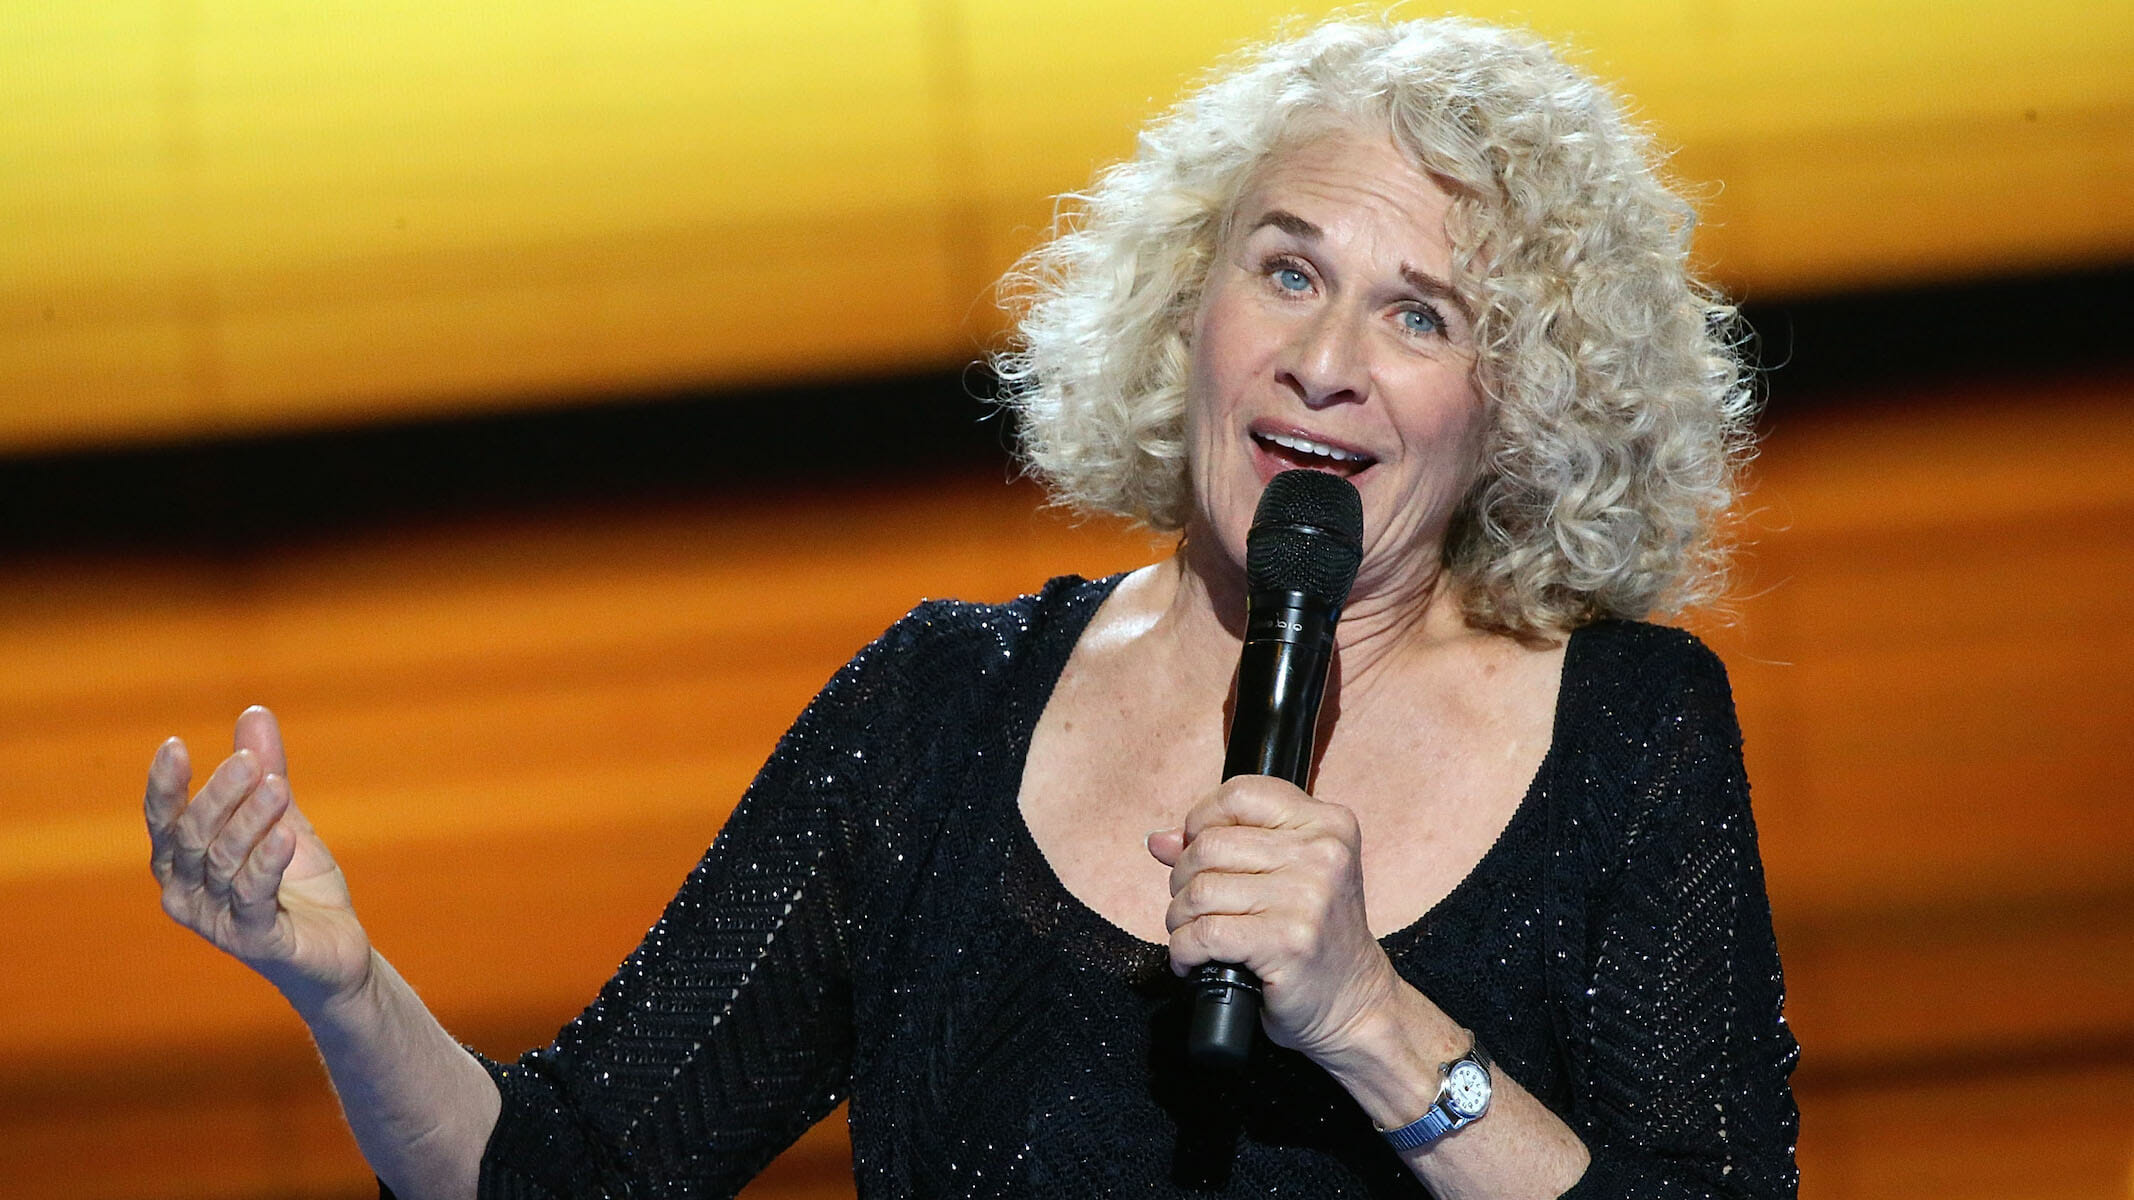 Hear Carole King Command a New York Stage in 1993